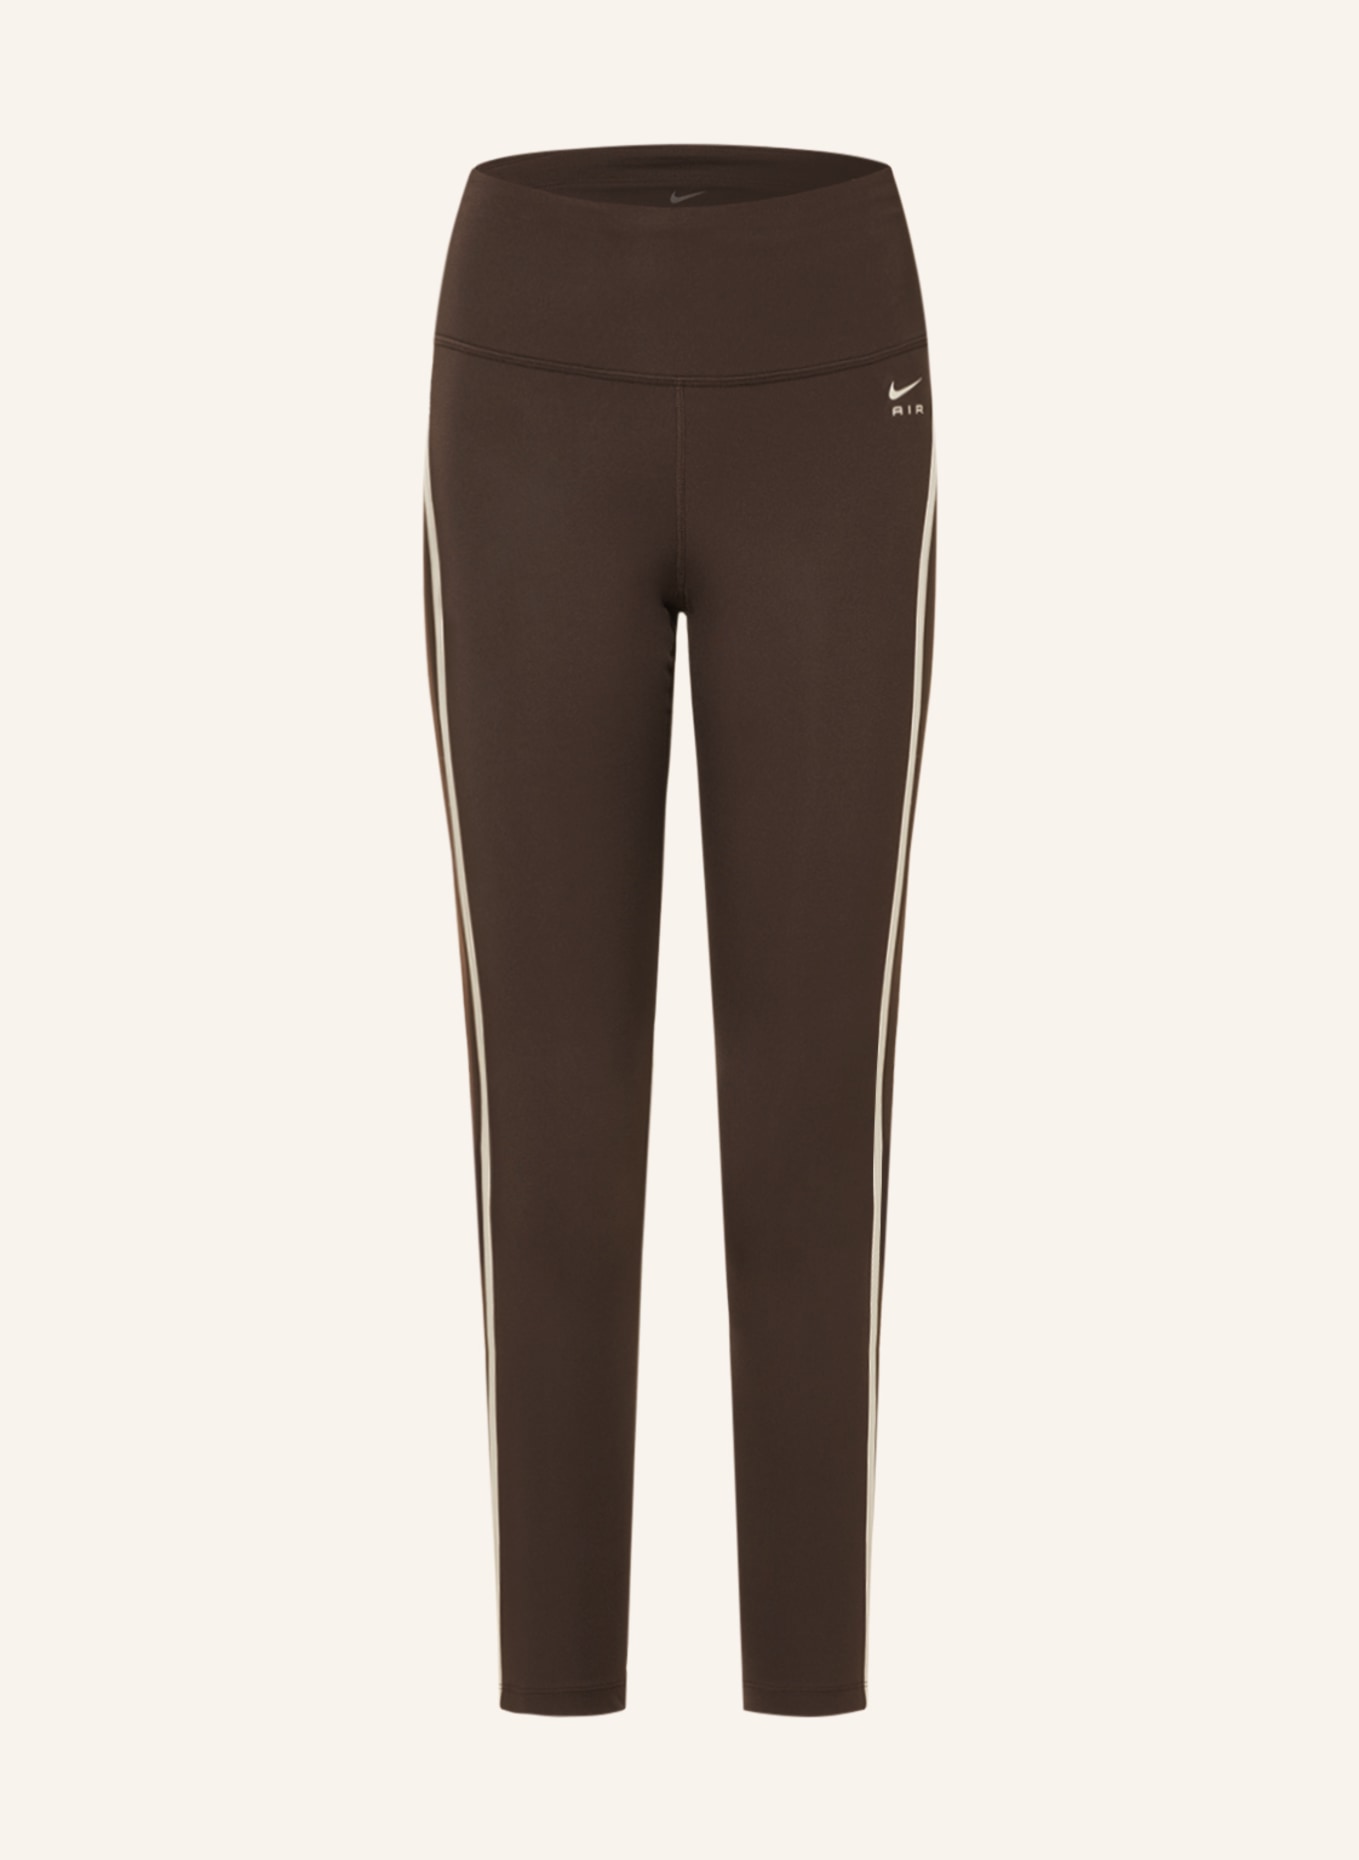 Nike Running tights FAST, Color: DARK BROWN/ LIGHT BROWN (Image 1)